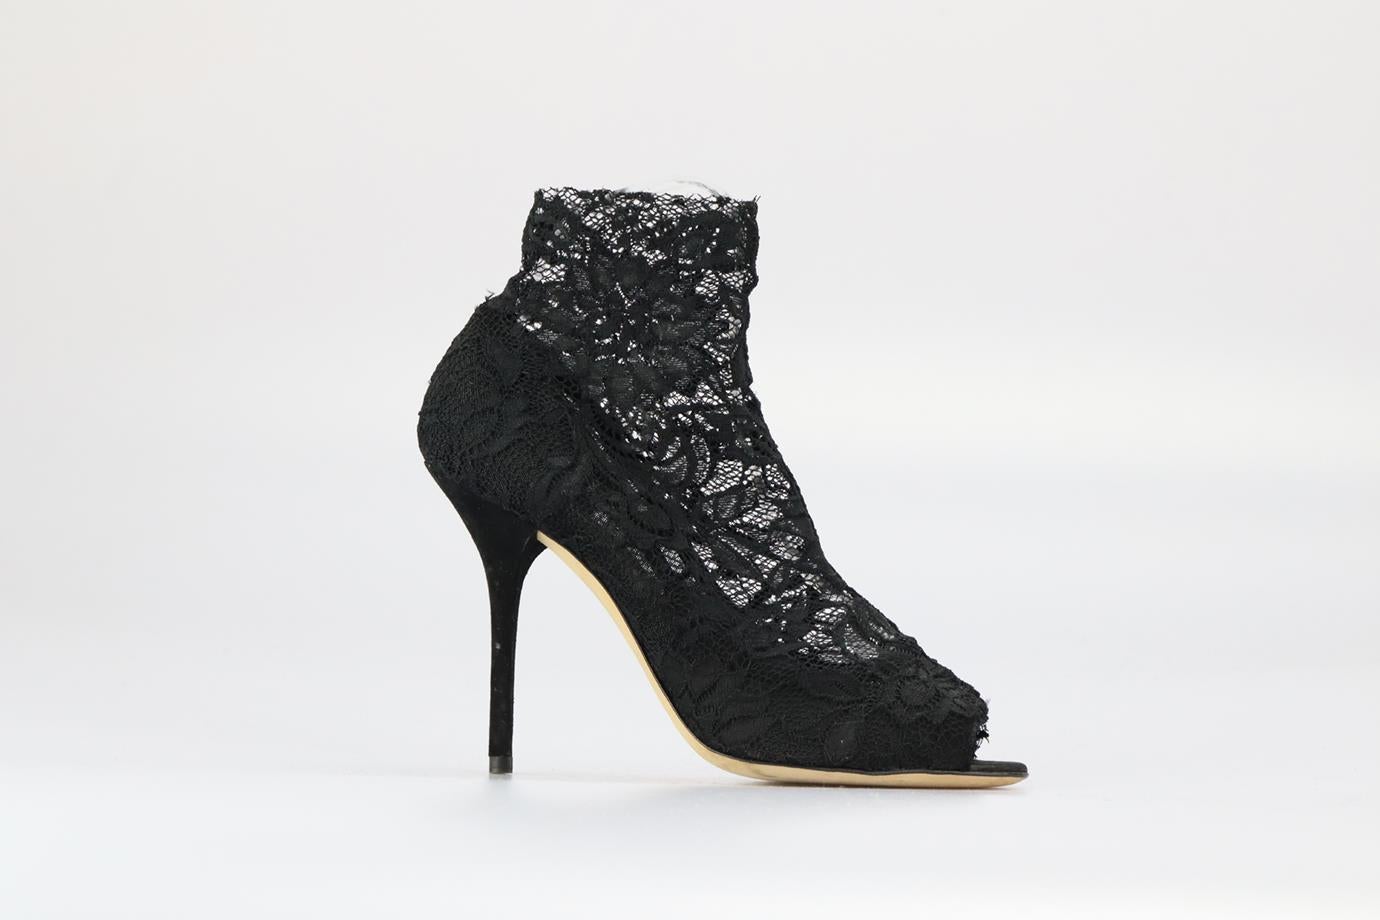 Dolce And Gabbana Stretch Lace And Suede Ankle Boots. Black. Pull on. Does not come with - dustbag or box. EU 40 (UK 7, US 10). Insole: 10 in. Heel height: 4.4 in. Condition: New without box.